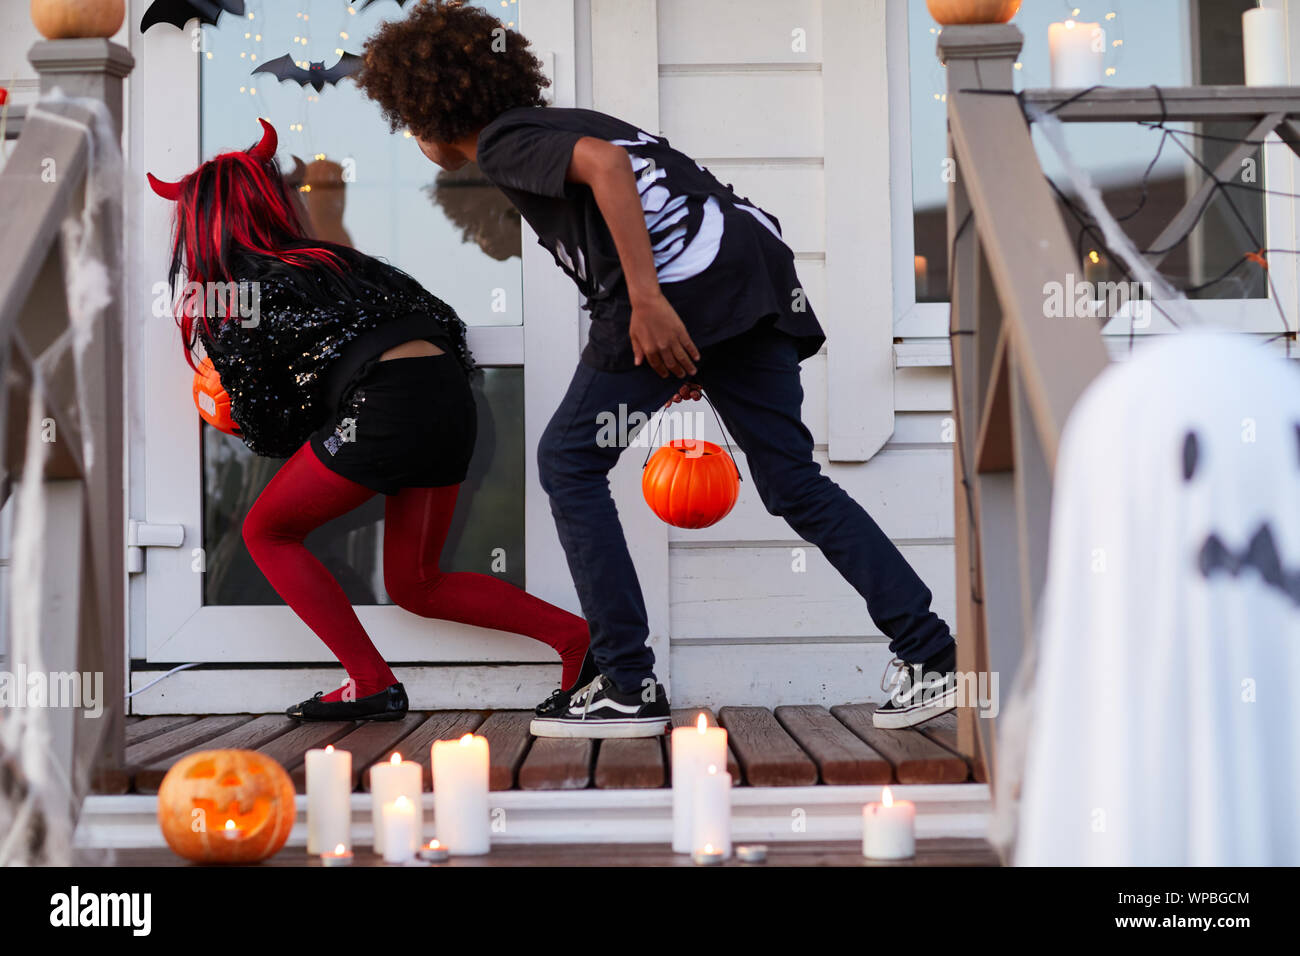 back-view-of-two-kids-sneaking-by-decorated-house-while-trick-or-treating-on-halloween-copy-sp...jpg